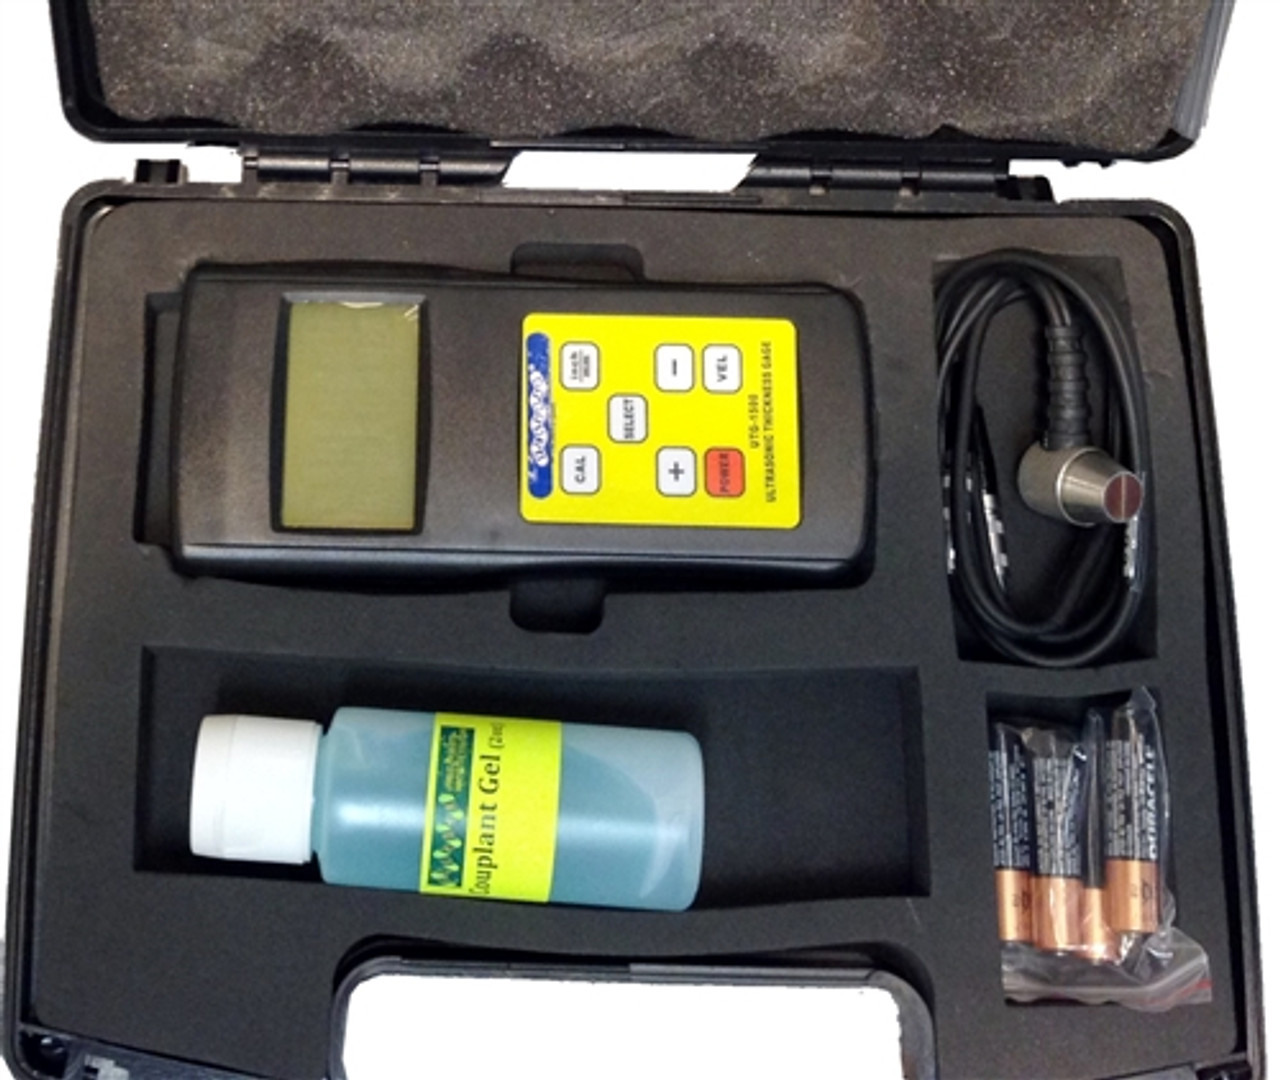 Flexbar Digital Ultrasonic Thickness Gage w/NIST Certificate for Calibration Check